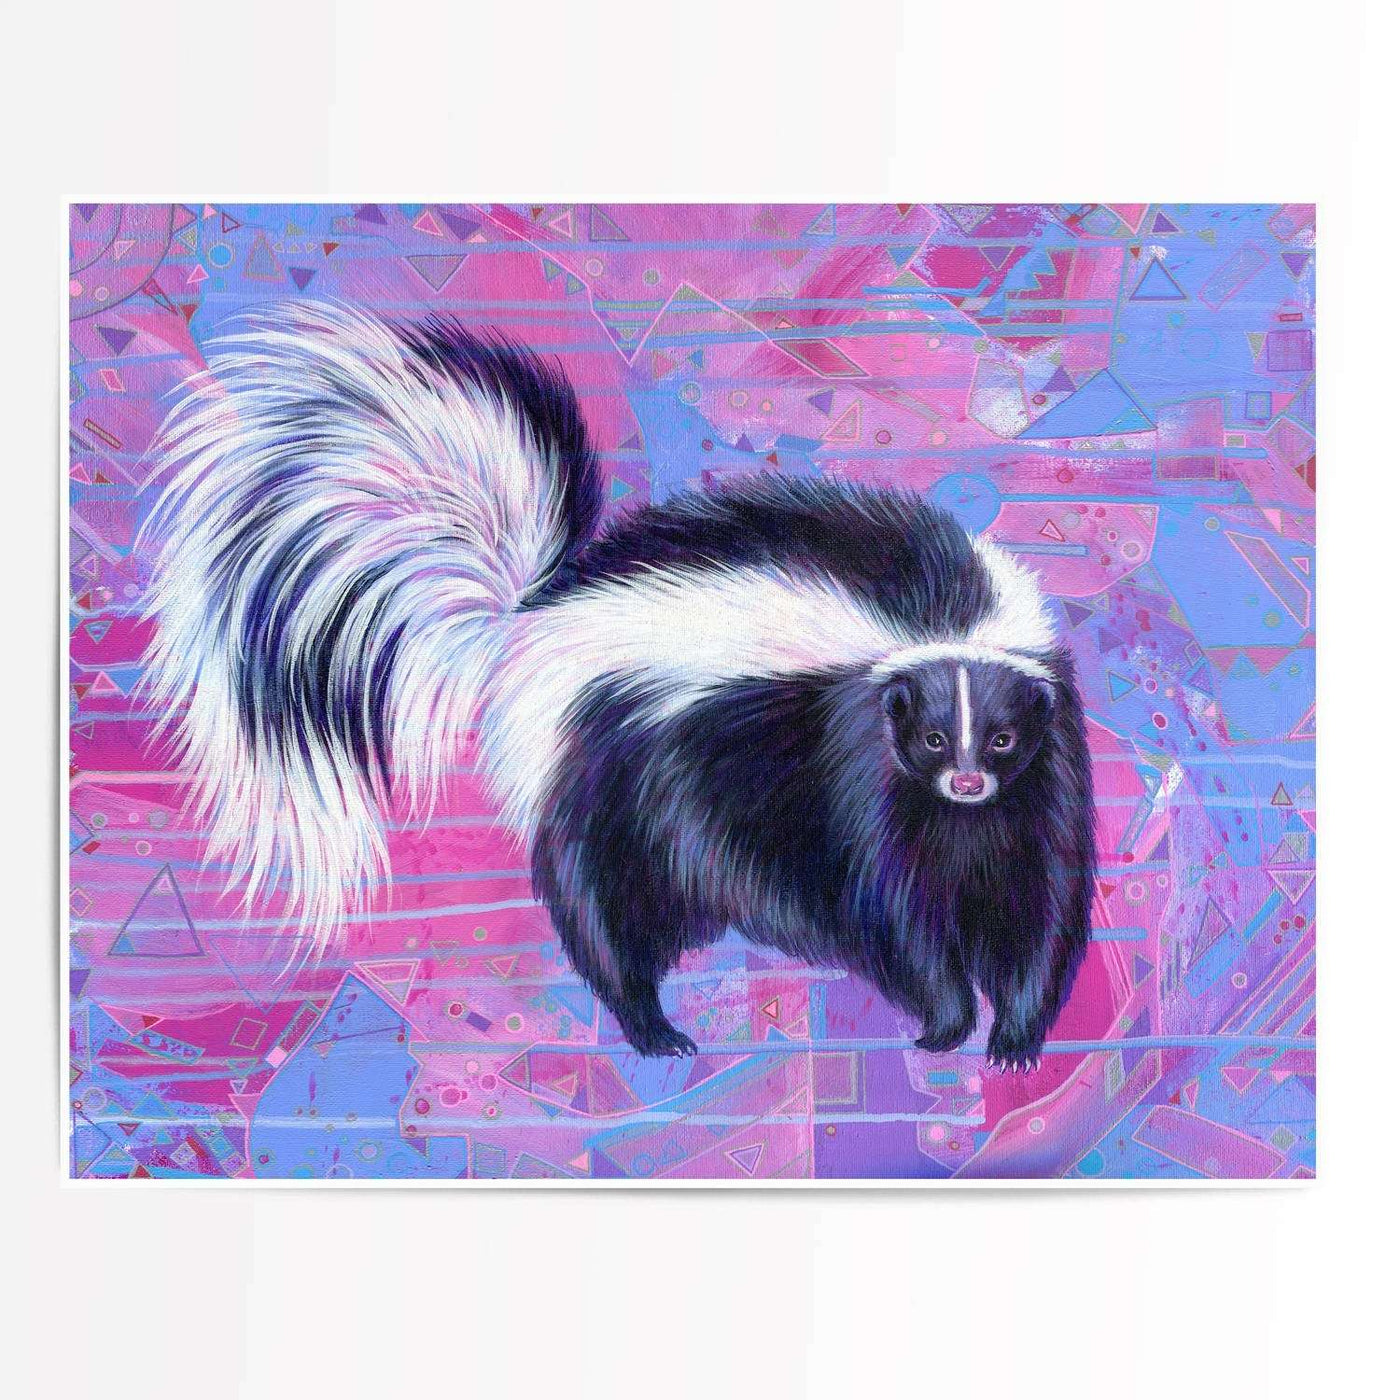 A colorful illustration of a skunk on a purple and pink geometric patterned background from the Trash Animals - Fine Art Print Bundle.